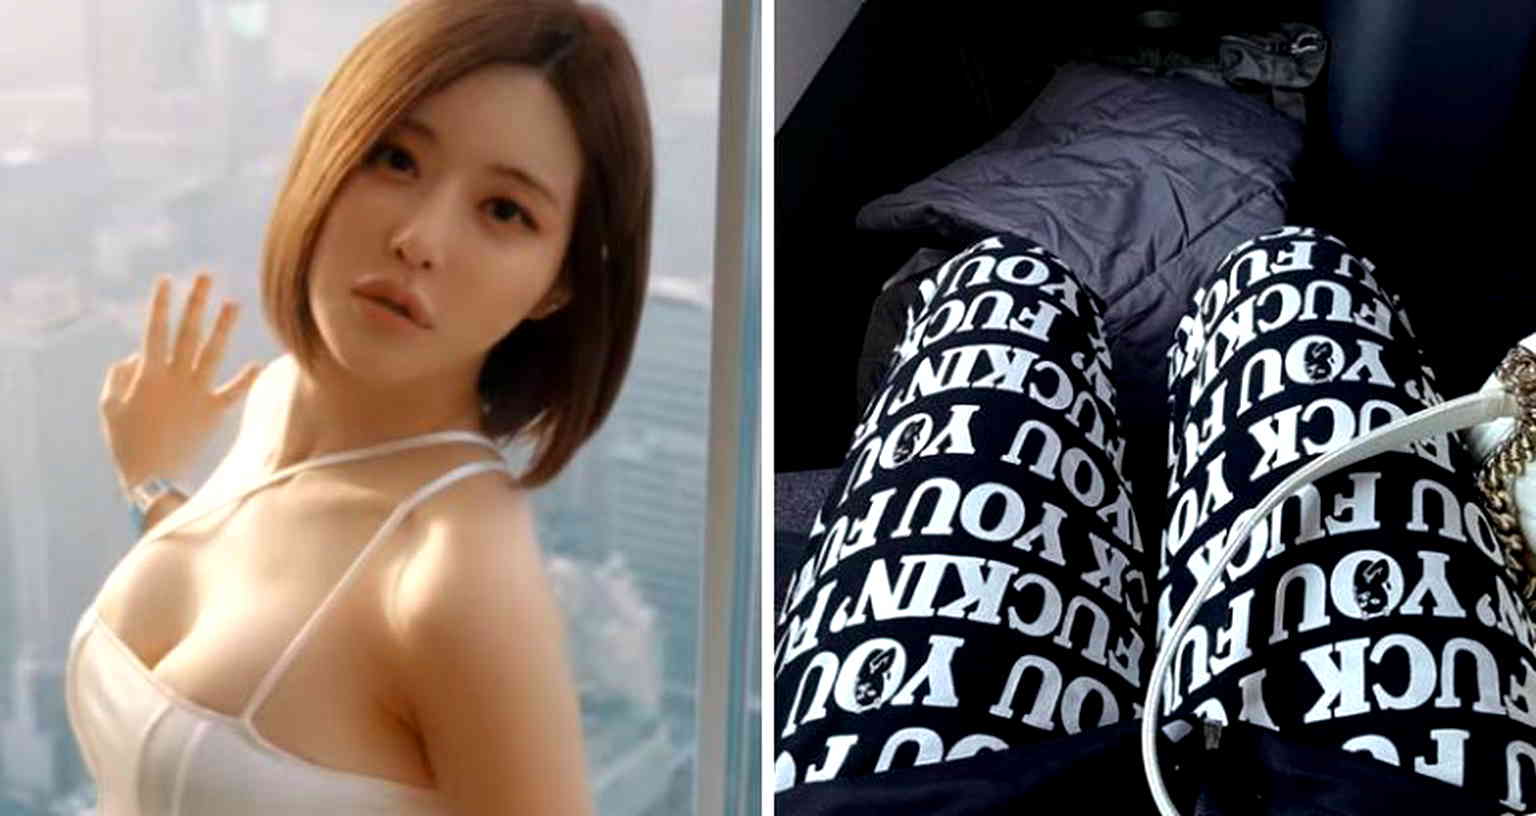 Korean artist DJ Soda says she was ‘harassed,’ kicked off flight over her ‘f*ck you’ sweatpants